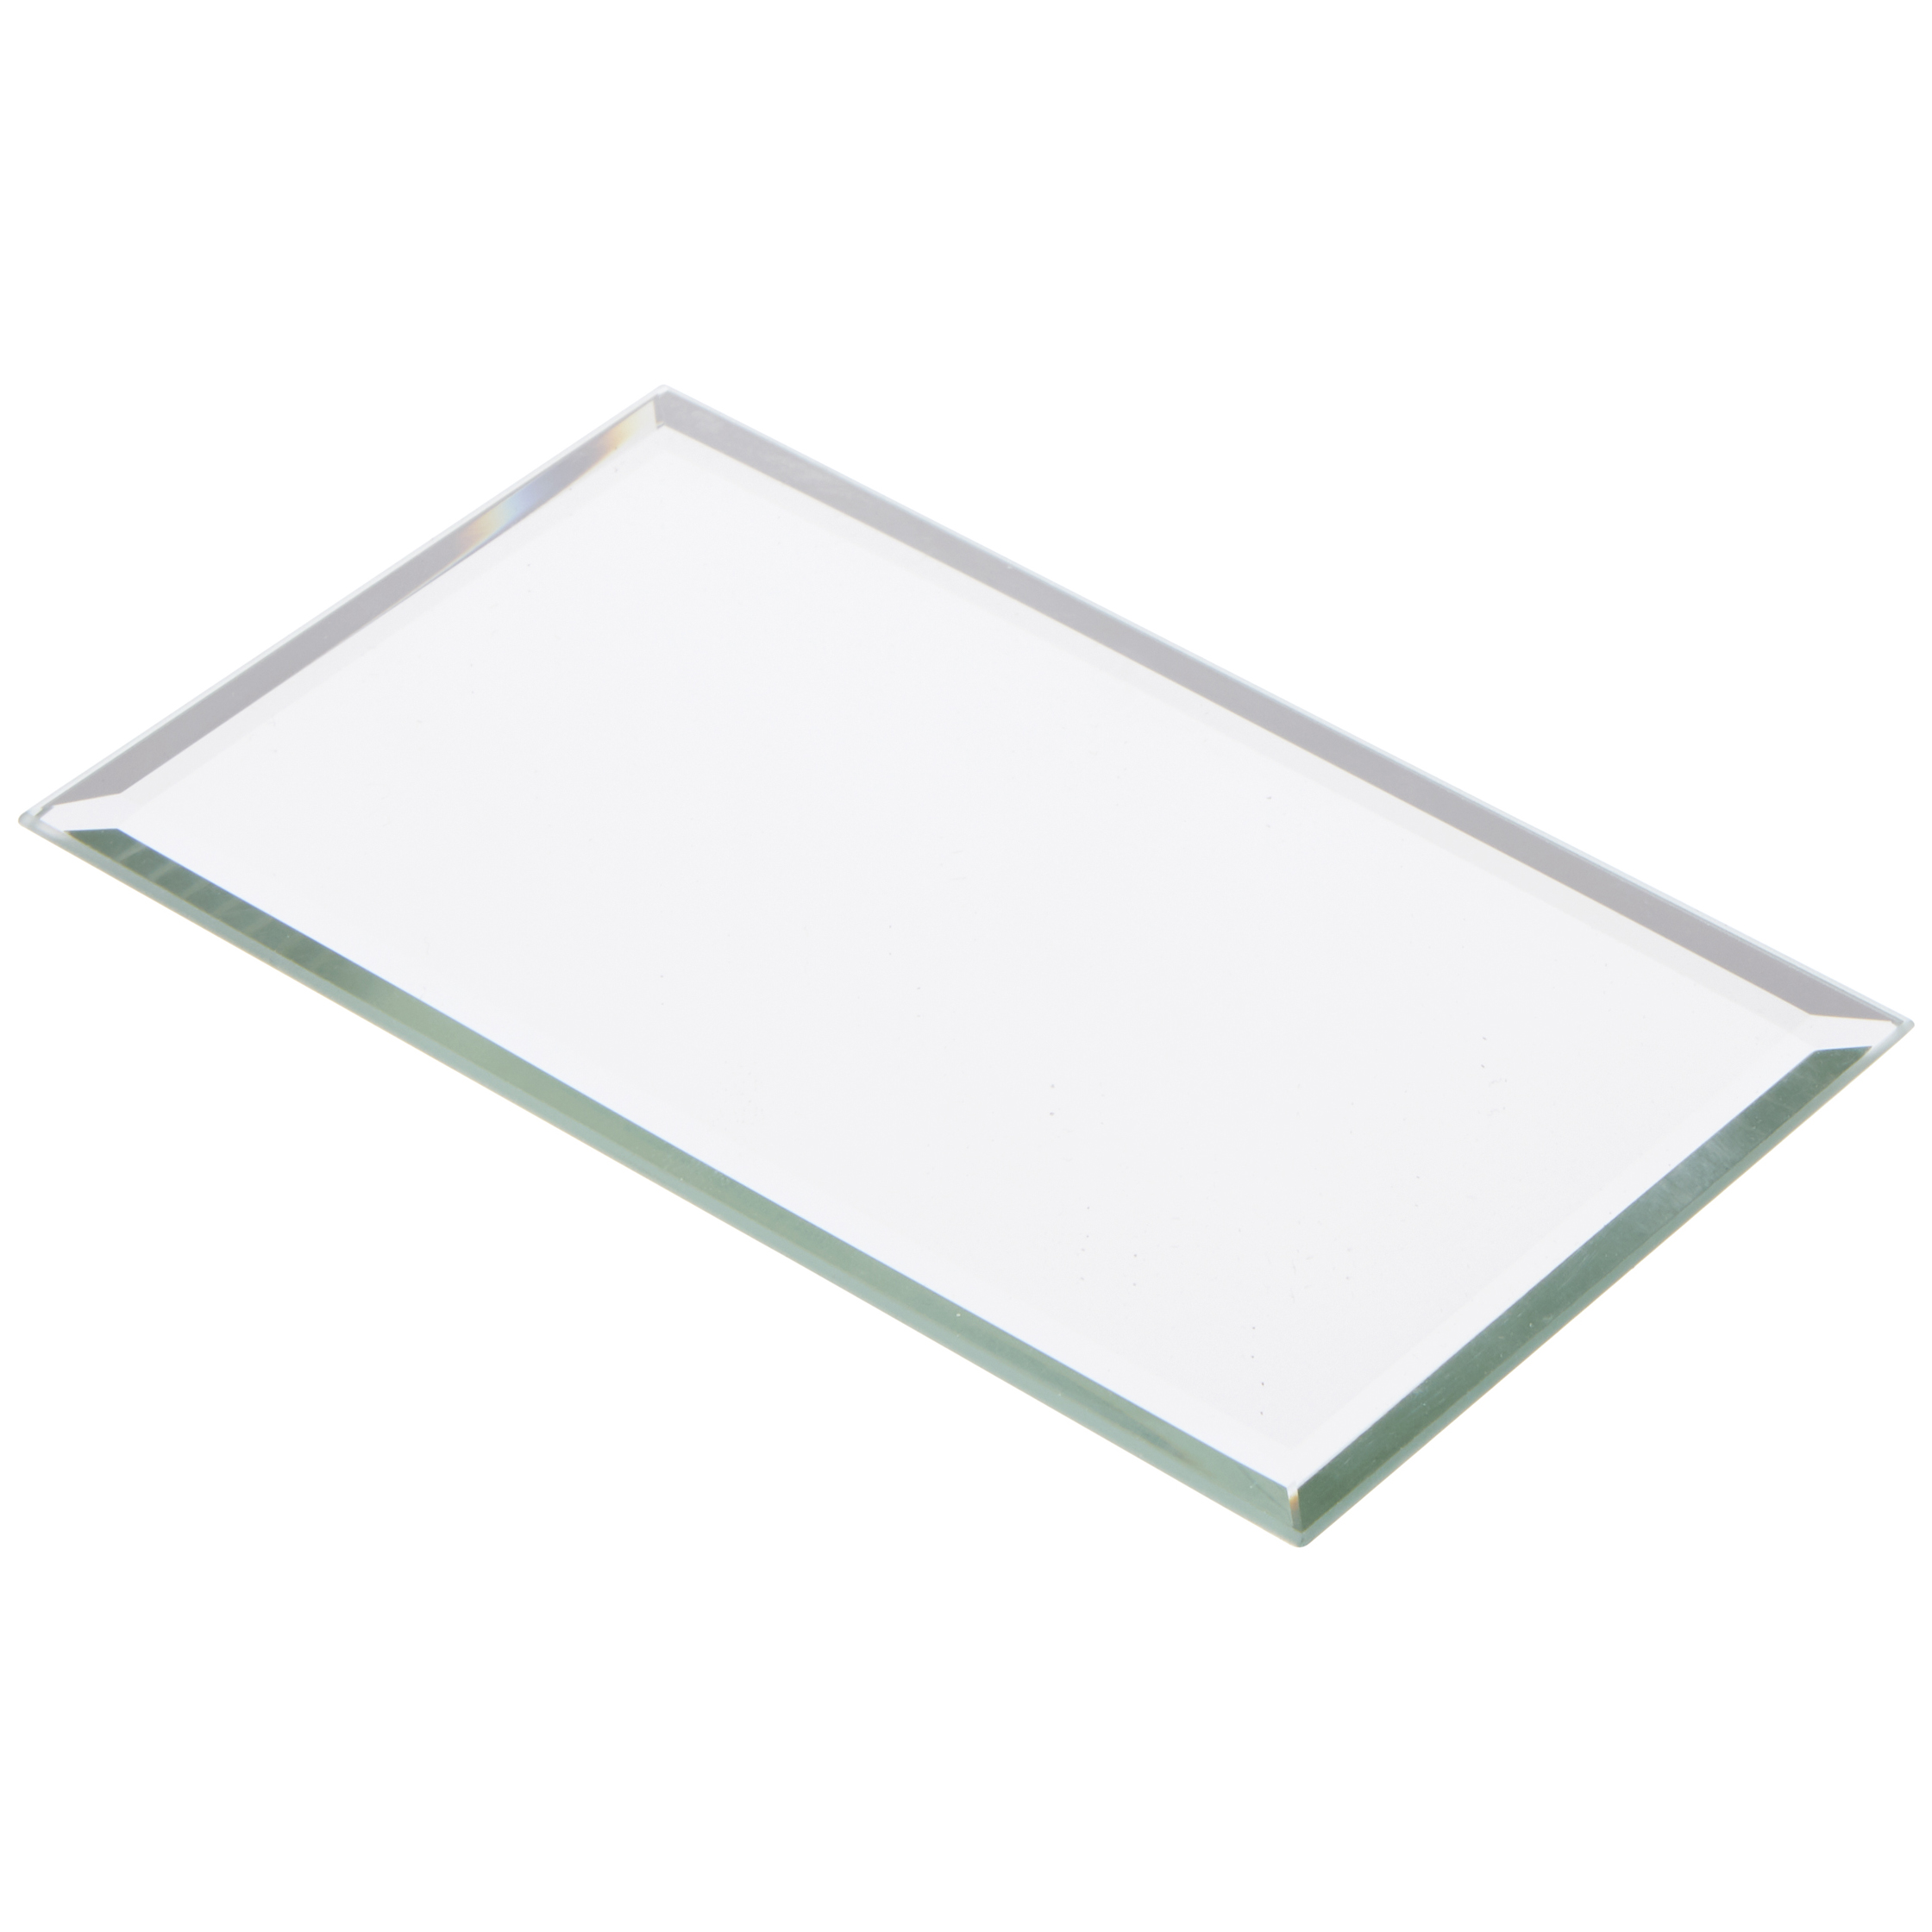 1 inch x 2 inch Pack of 24 Plymor Rectangle 3mm Beveled Glass Mirror 